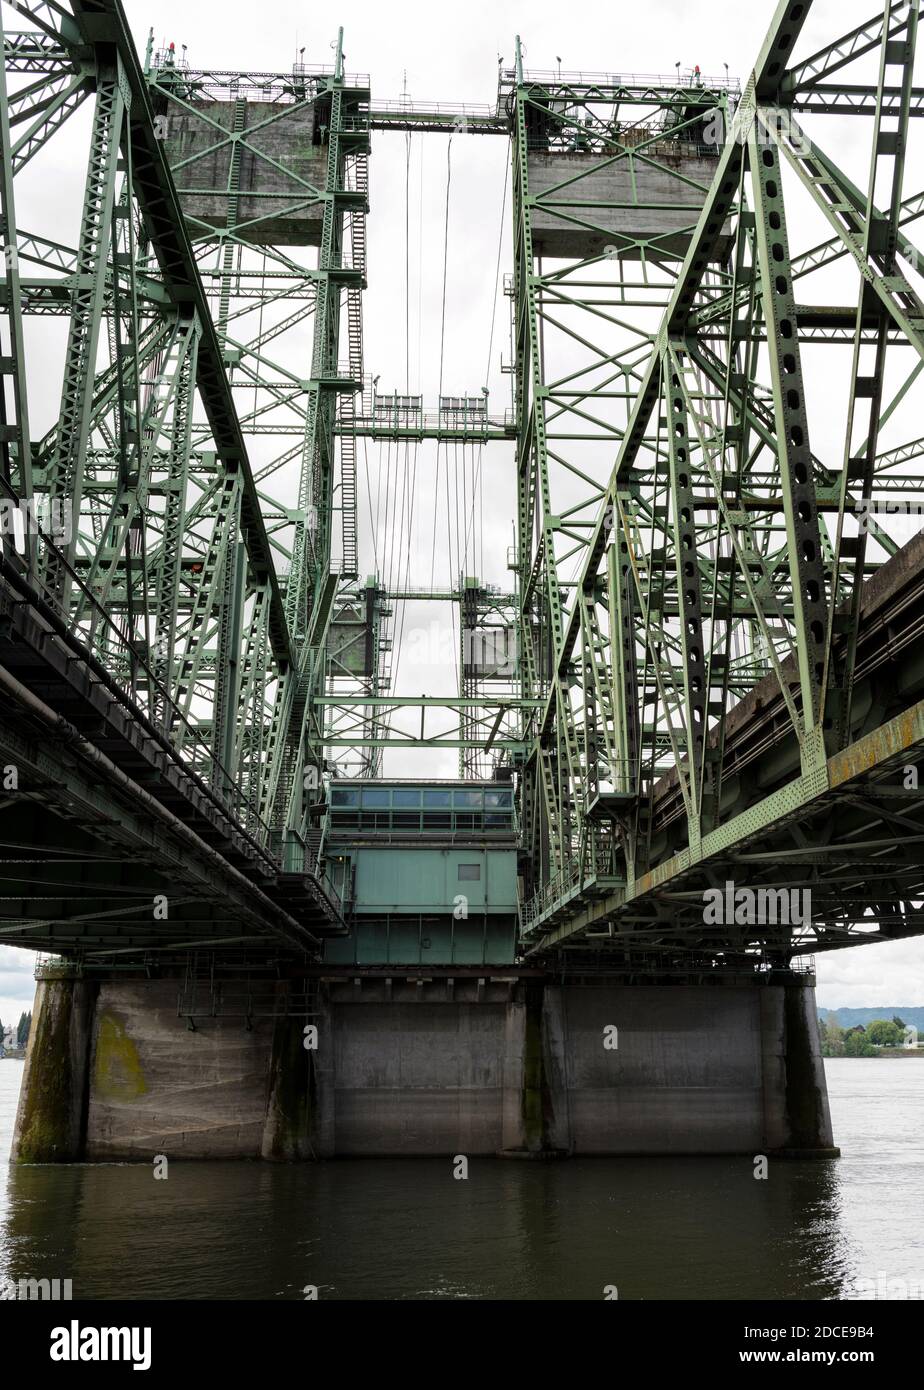 This is the Interstate Bridge Control House and northern section of the bridge.  The bridge spans the Columbia River between Oregon and Washington. Stock Photo